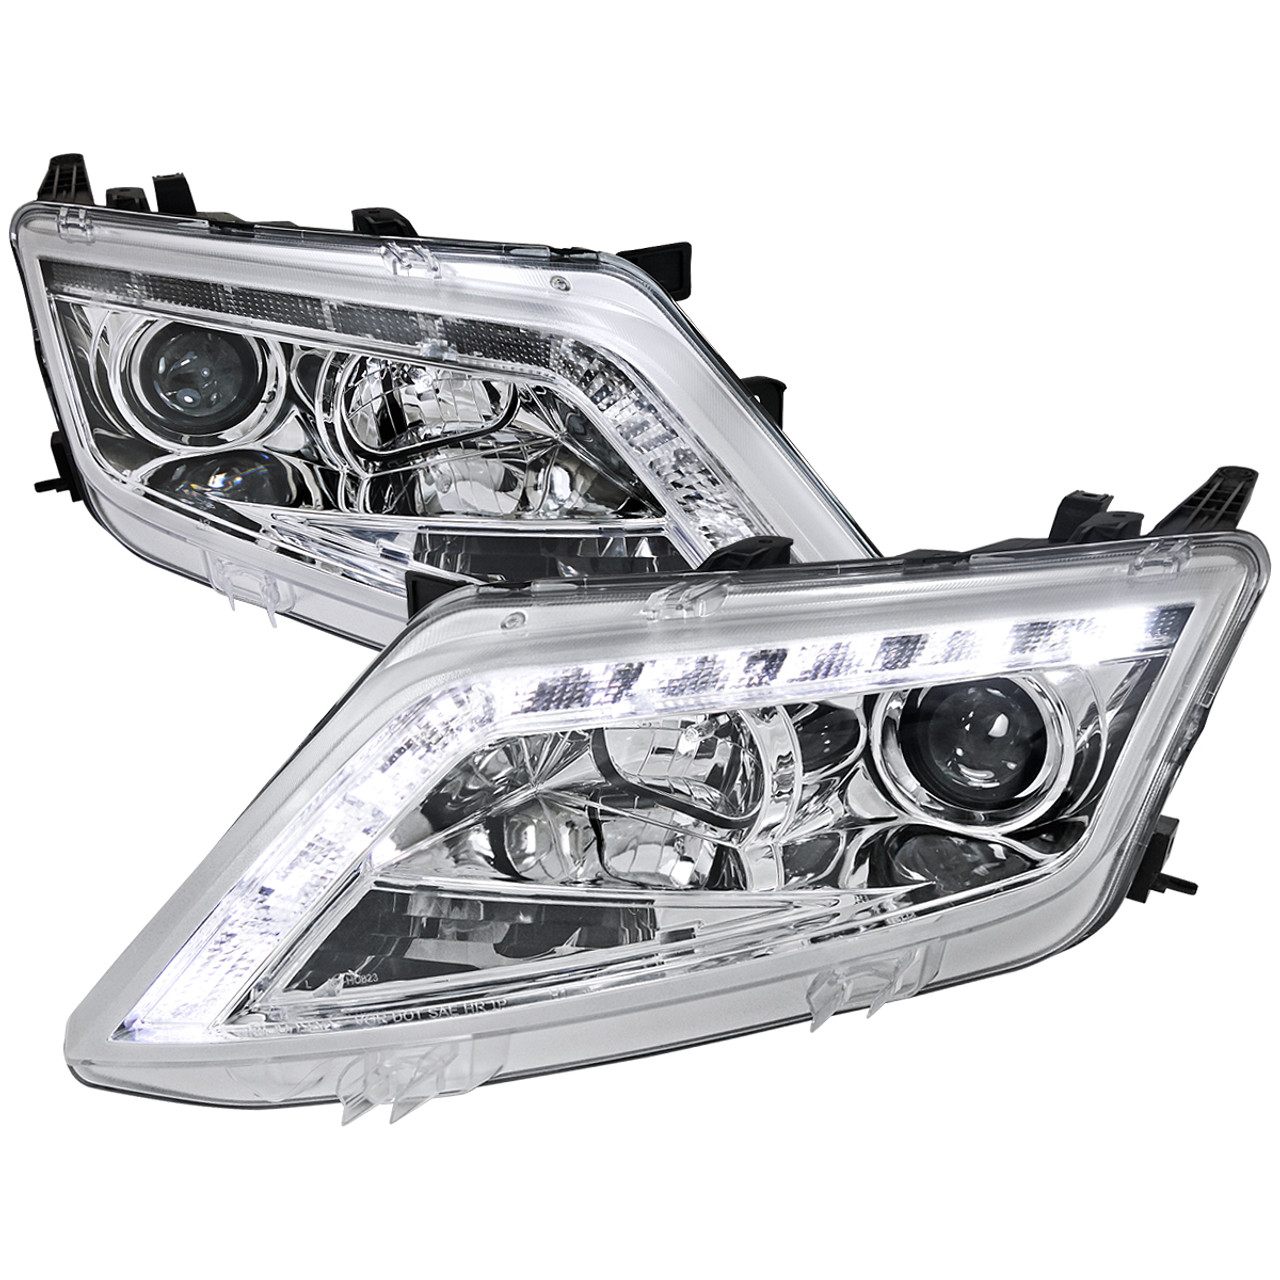 2010-2012 Ford Fusion Projector Headlights w/ LED Light Strip